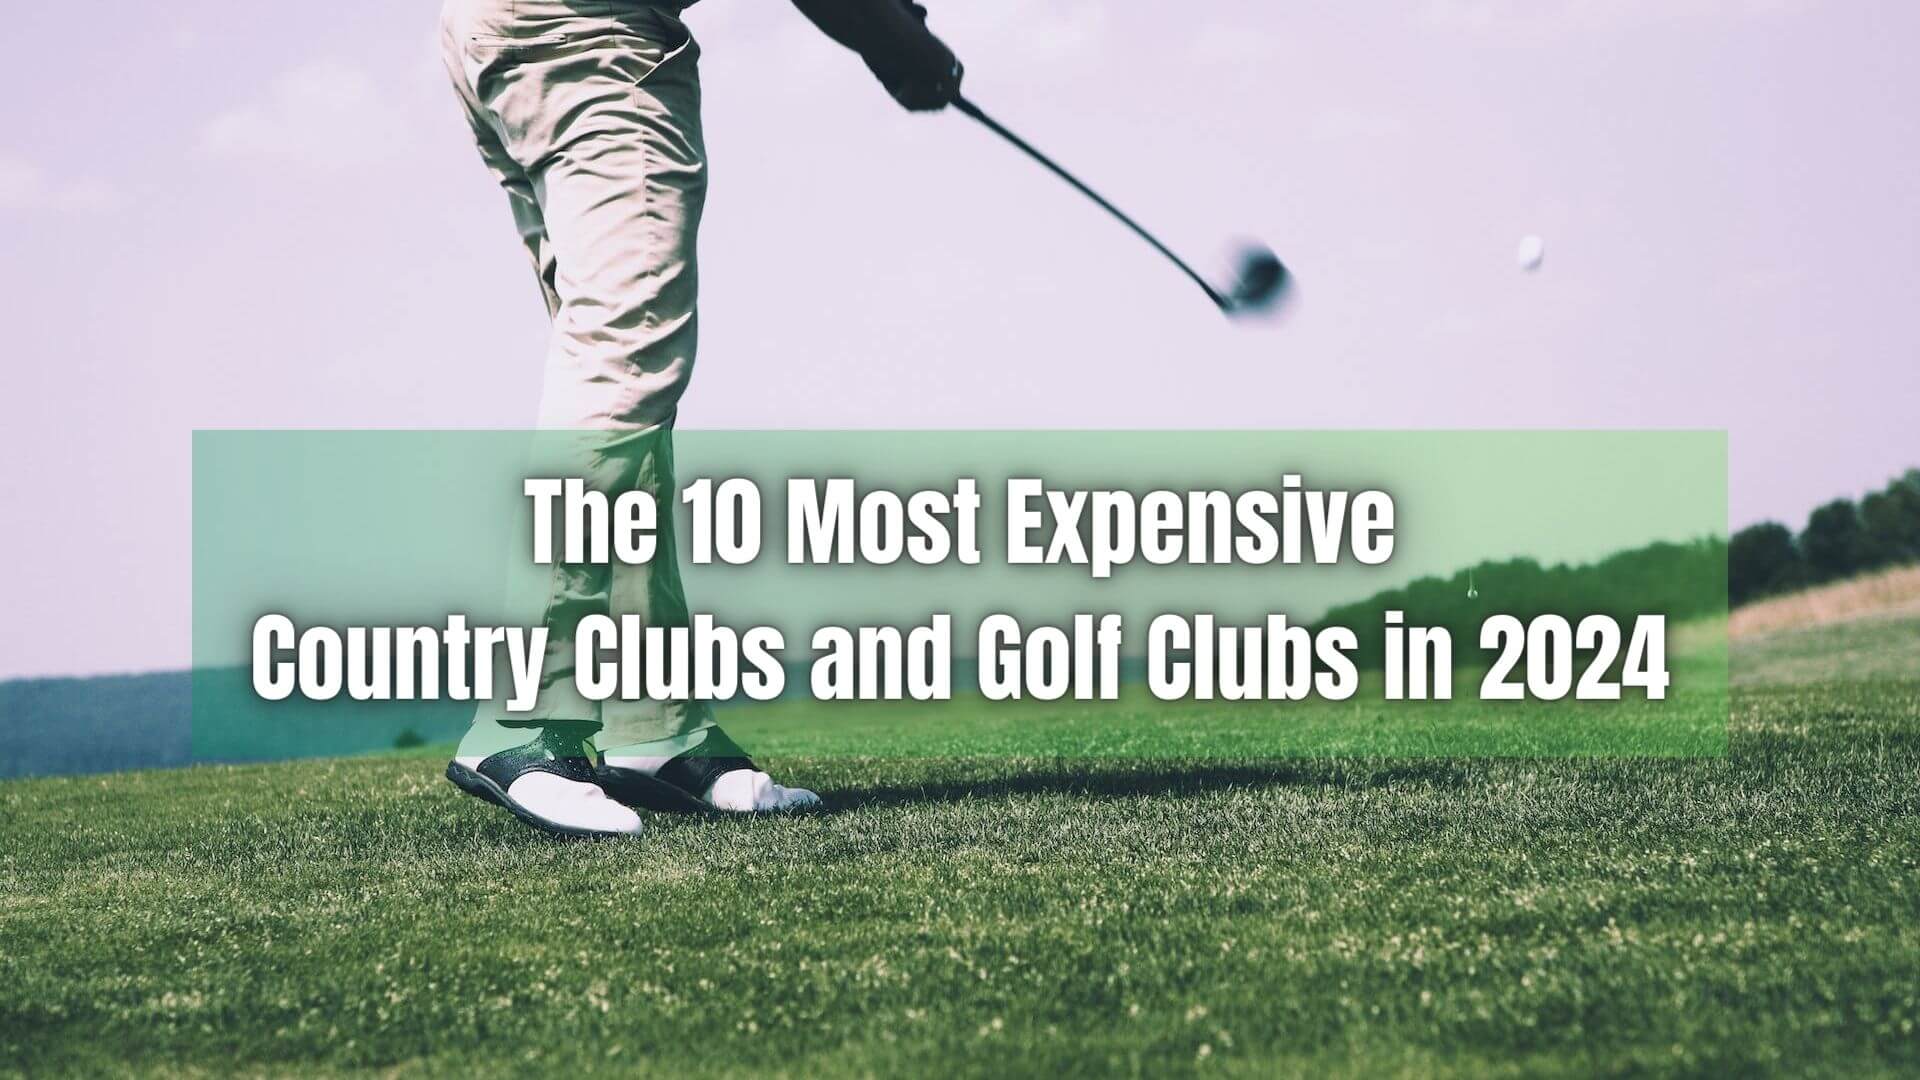 Looking for the most expensive country clubs and golf courses in the world? Here's a list of the 10 country clubs and golf clubs in 2023.